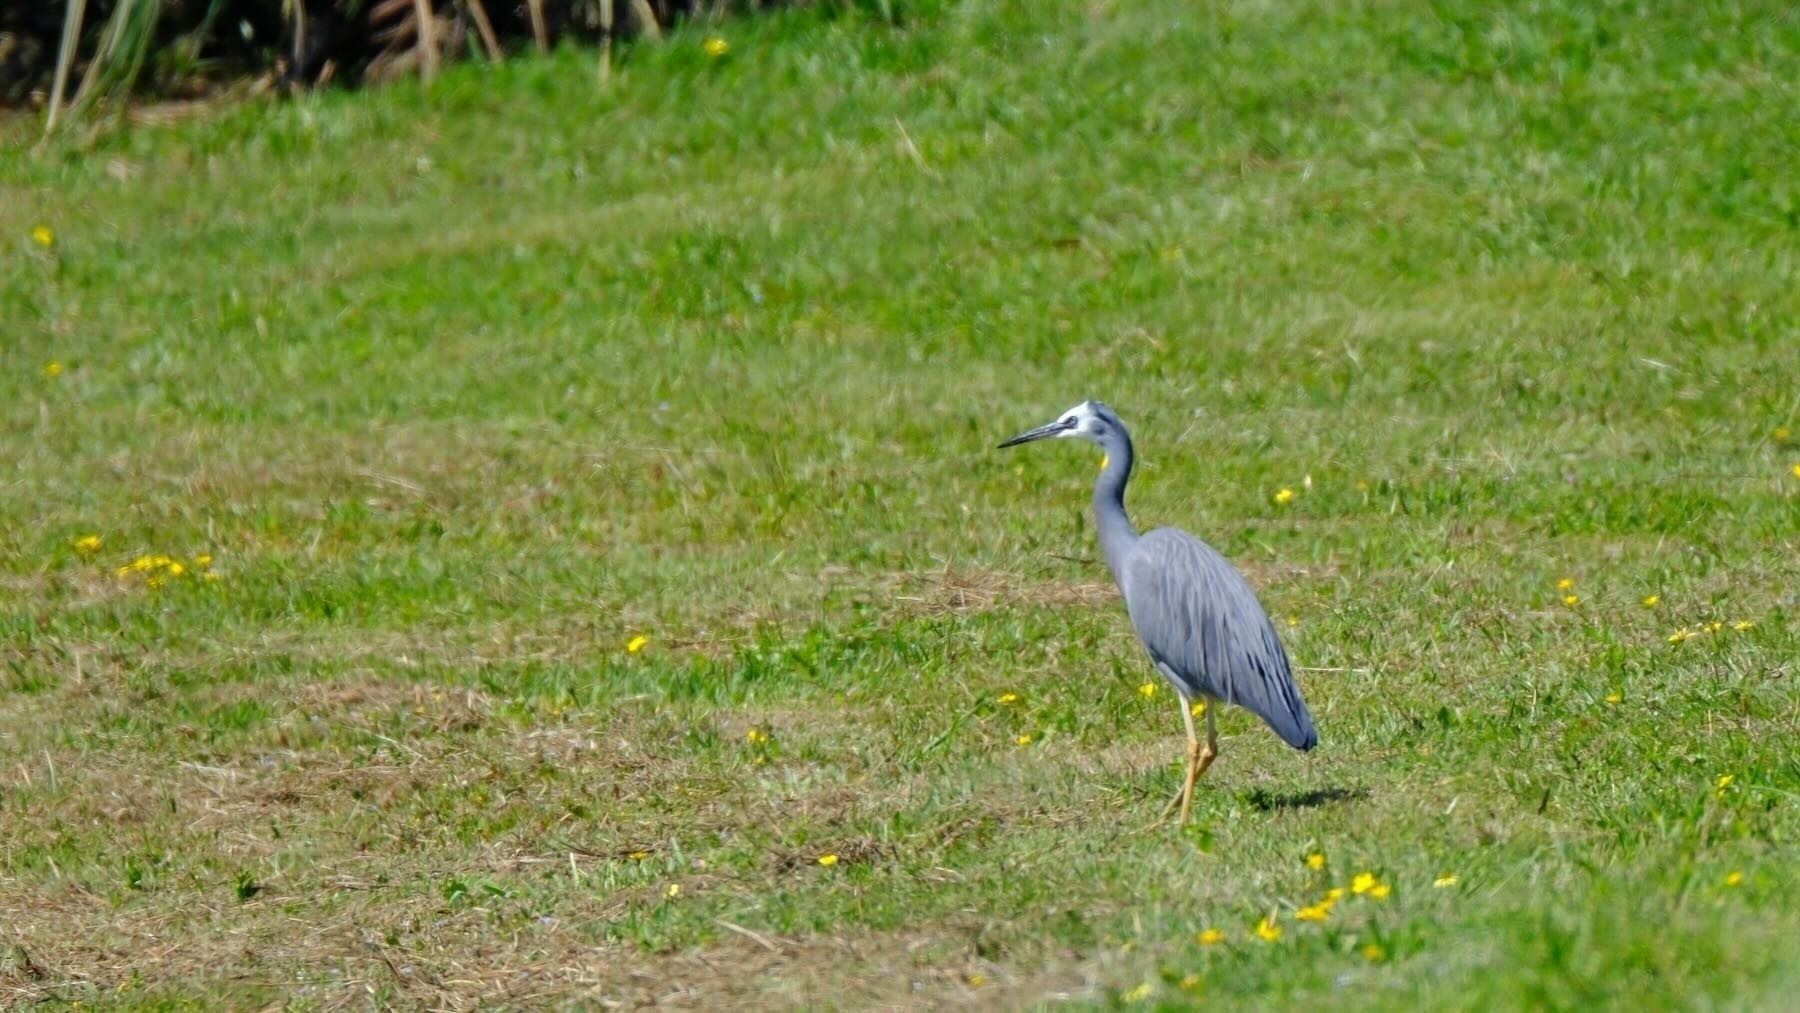 Large grey wading bird with white face. On grass. 